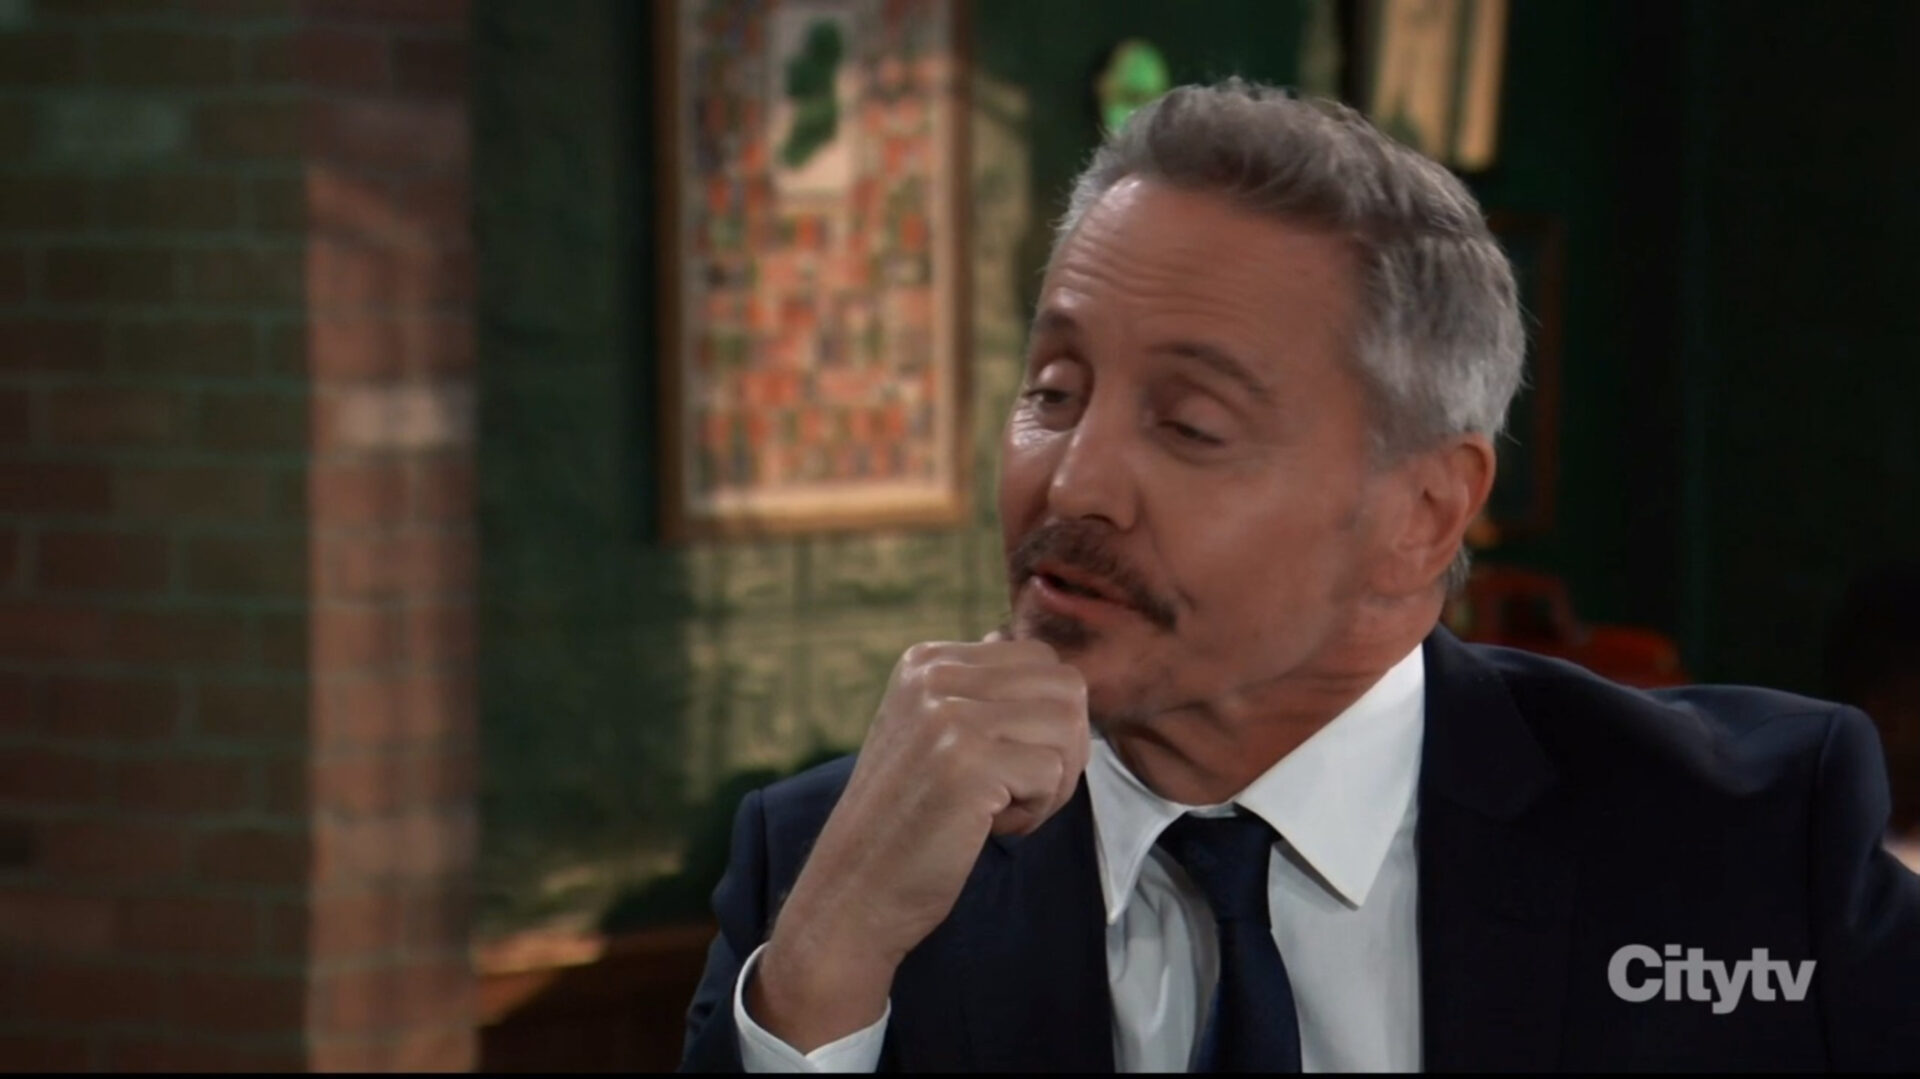 brennan wants to get to know carly better GH recaps soapsspoilers